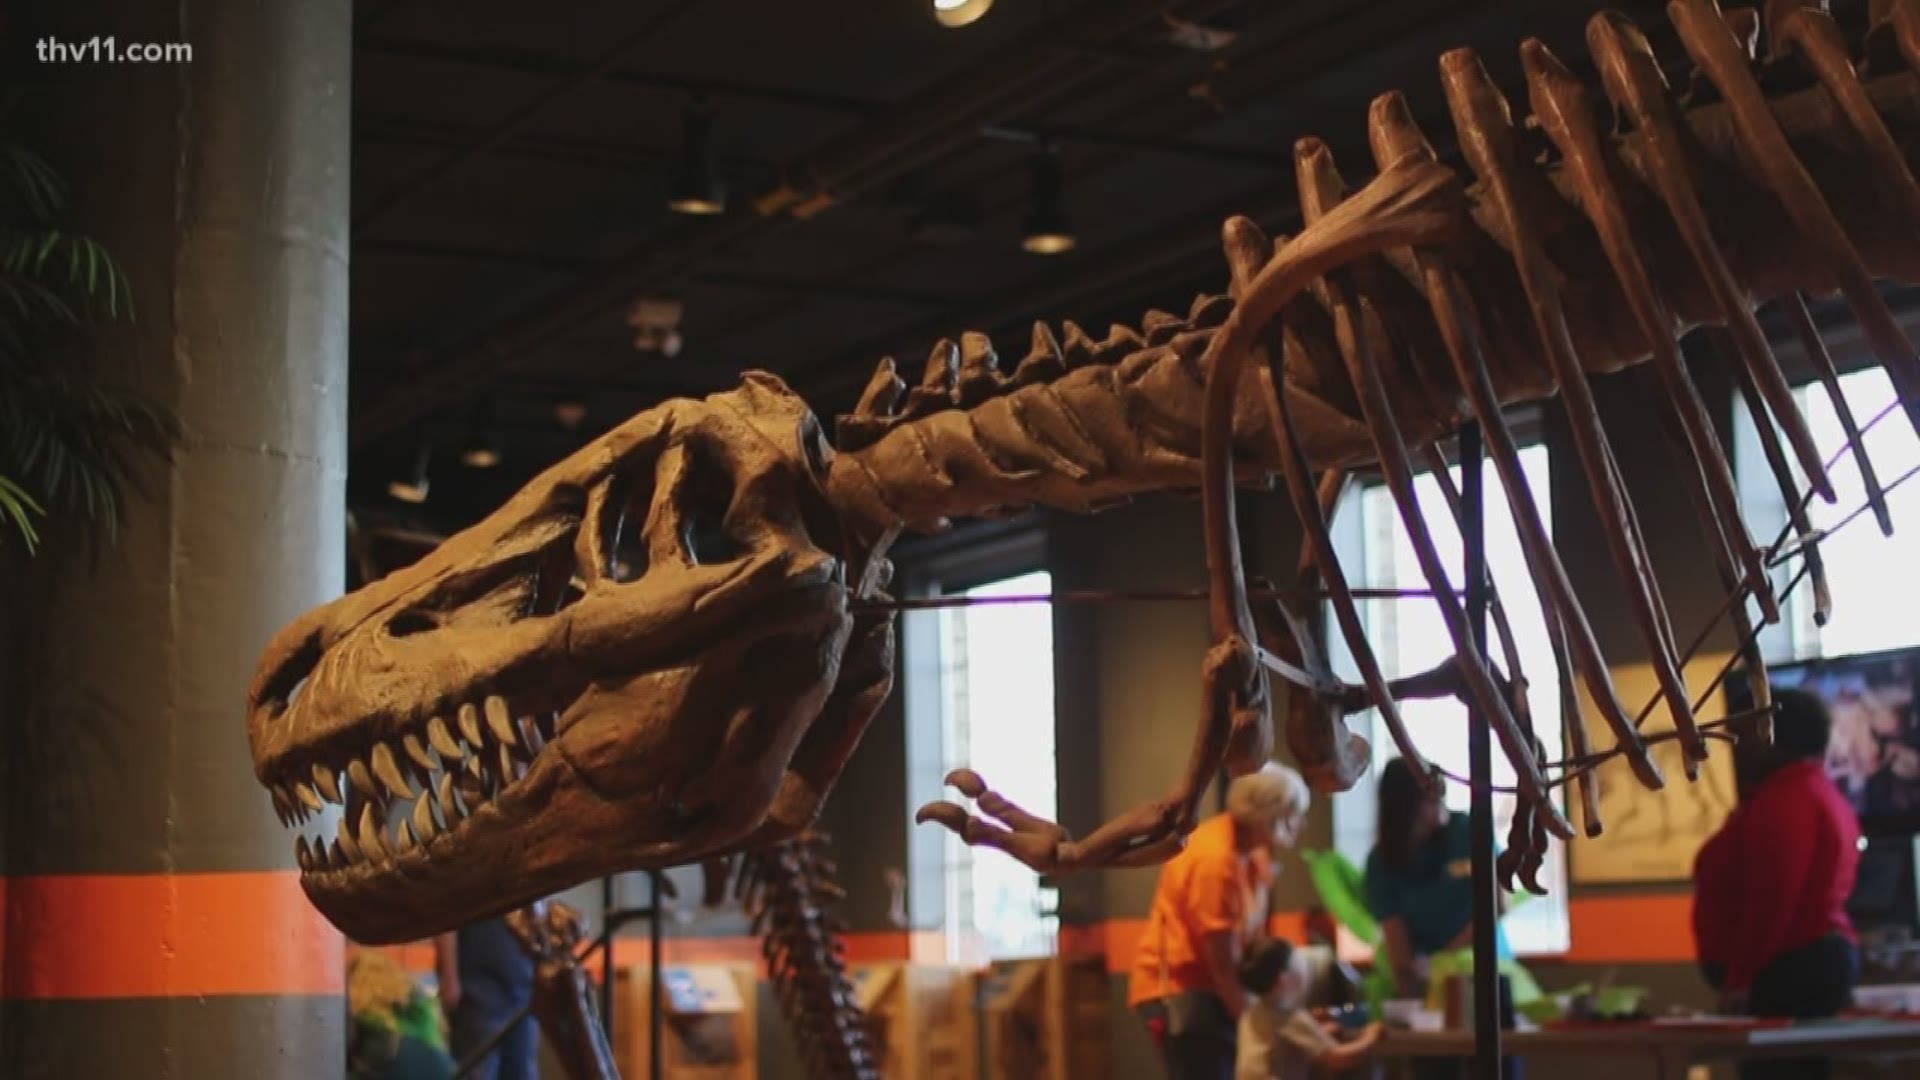 At the Museum of Discovery, there's a dinosaur exhibit complete with a dig site that allows visitors to pretend to make a prehistoric find.